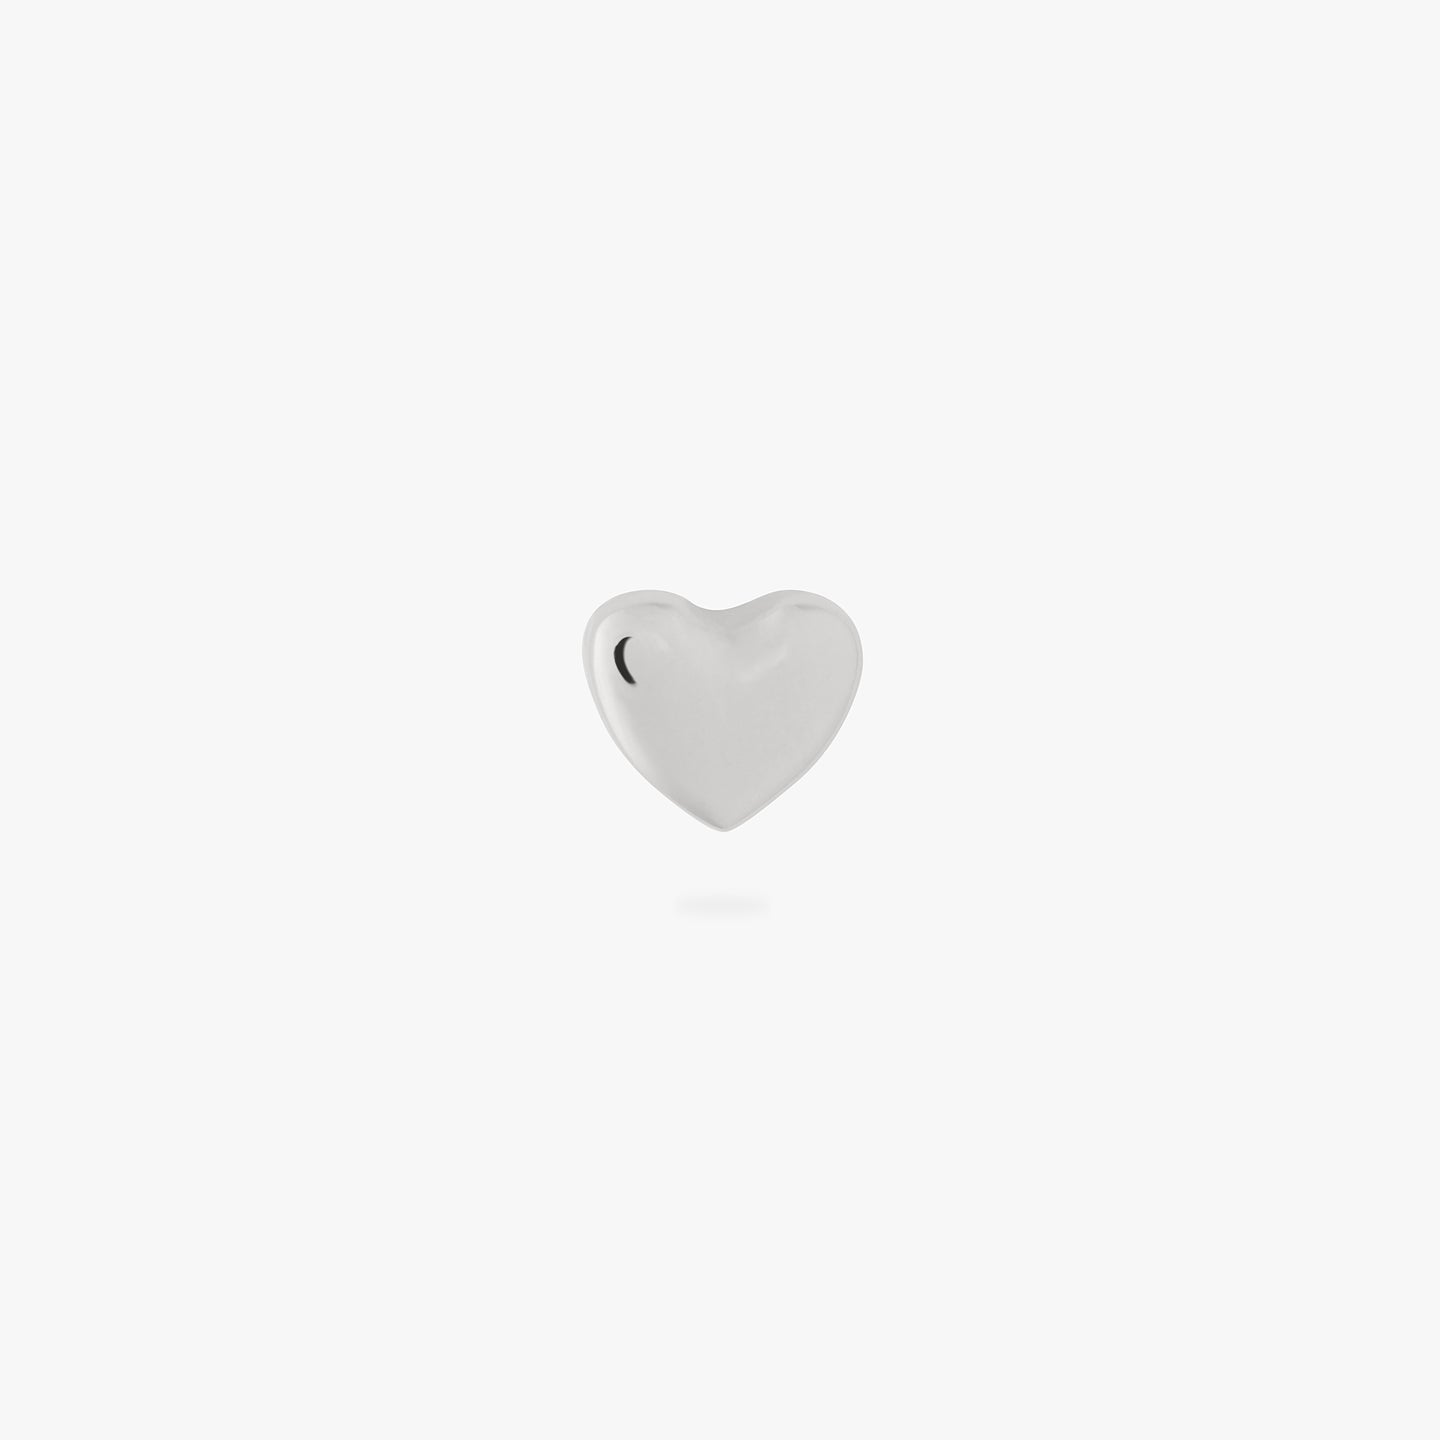 An image of a silver heart shaped flatback post that is 8mm in length. color:null|8mm length